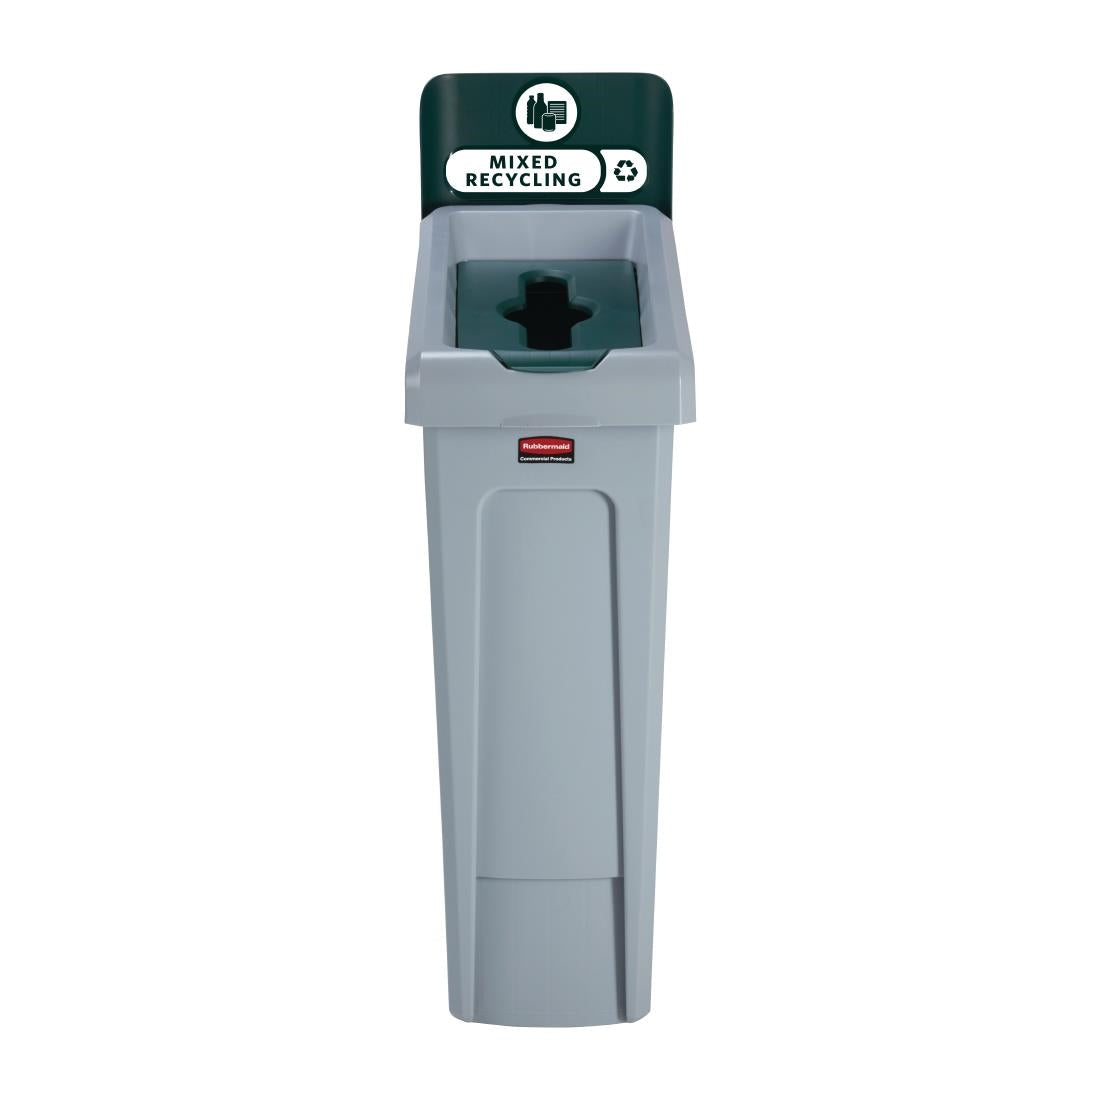 DY084 Rubbermaid Slim Jim Mixed Recycling Station Green 87Ltr